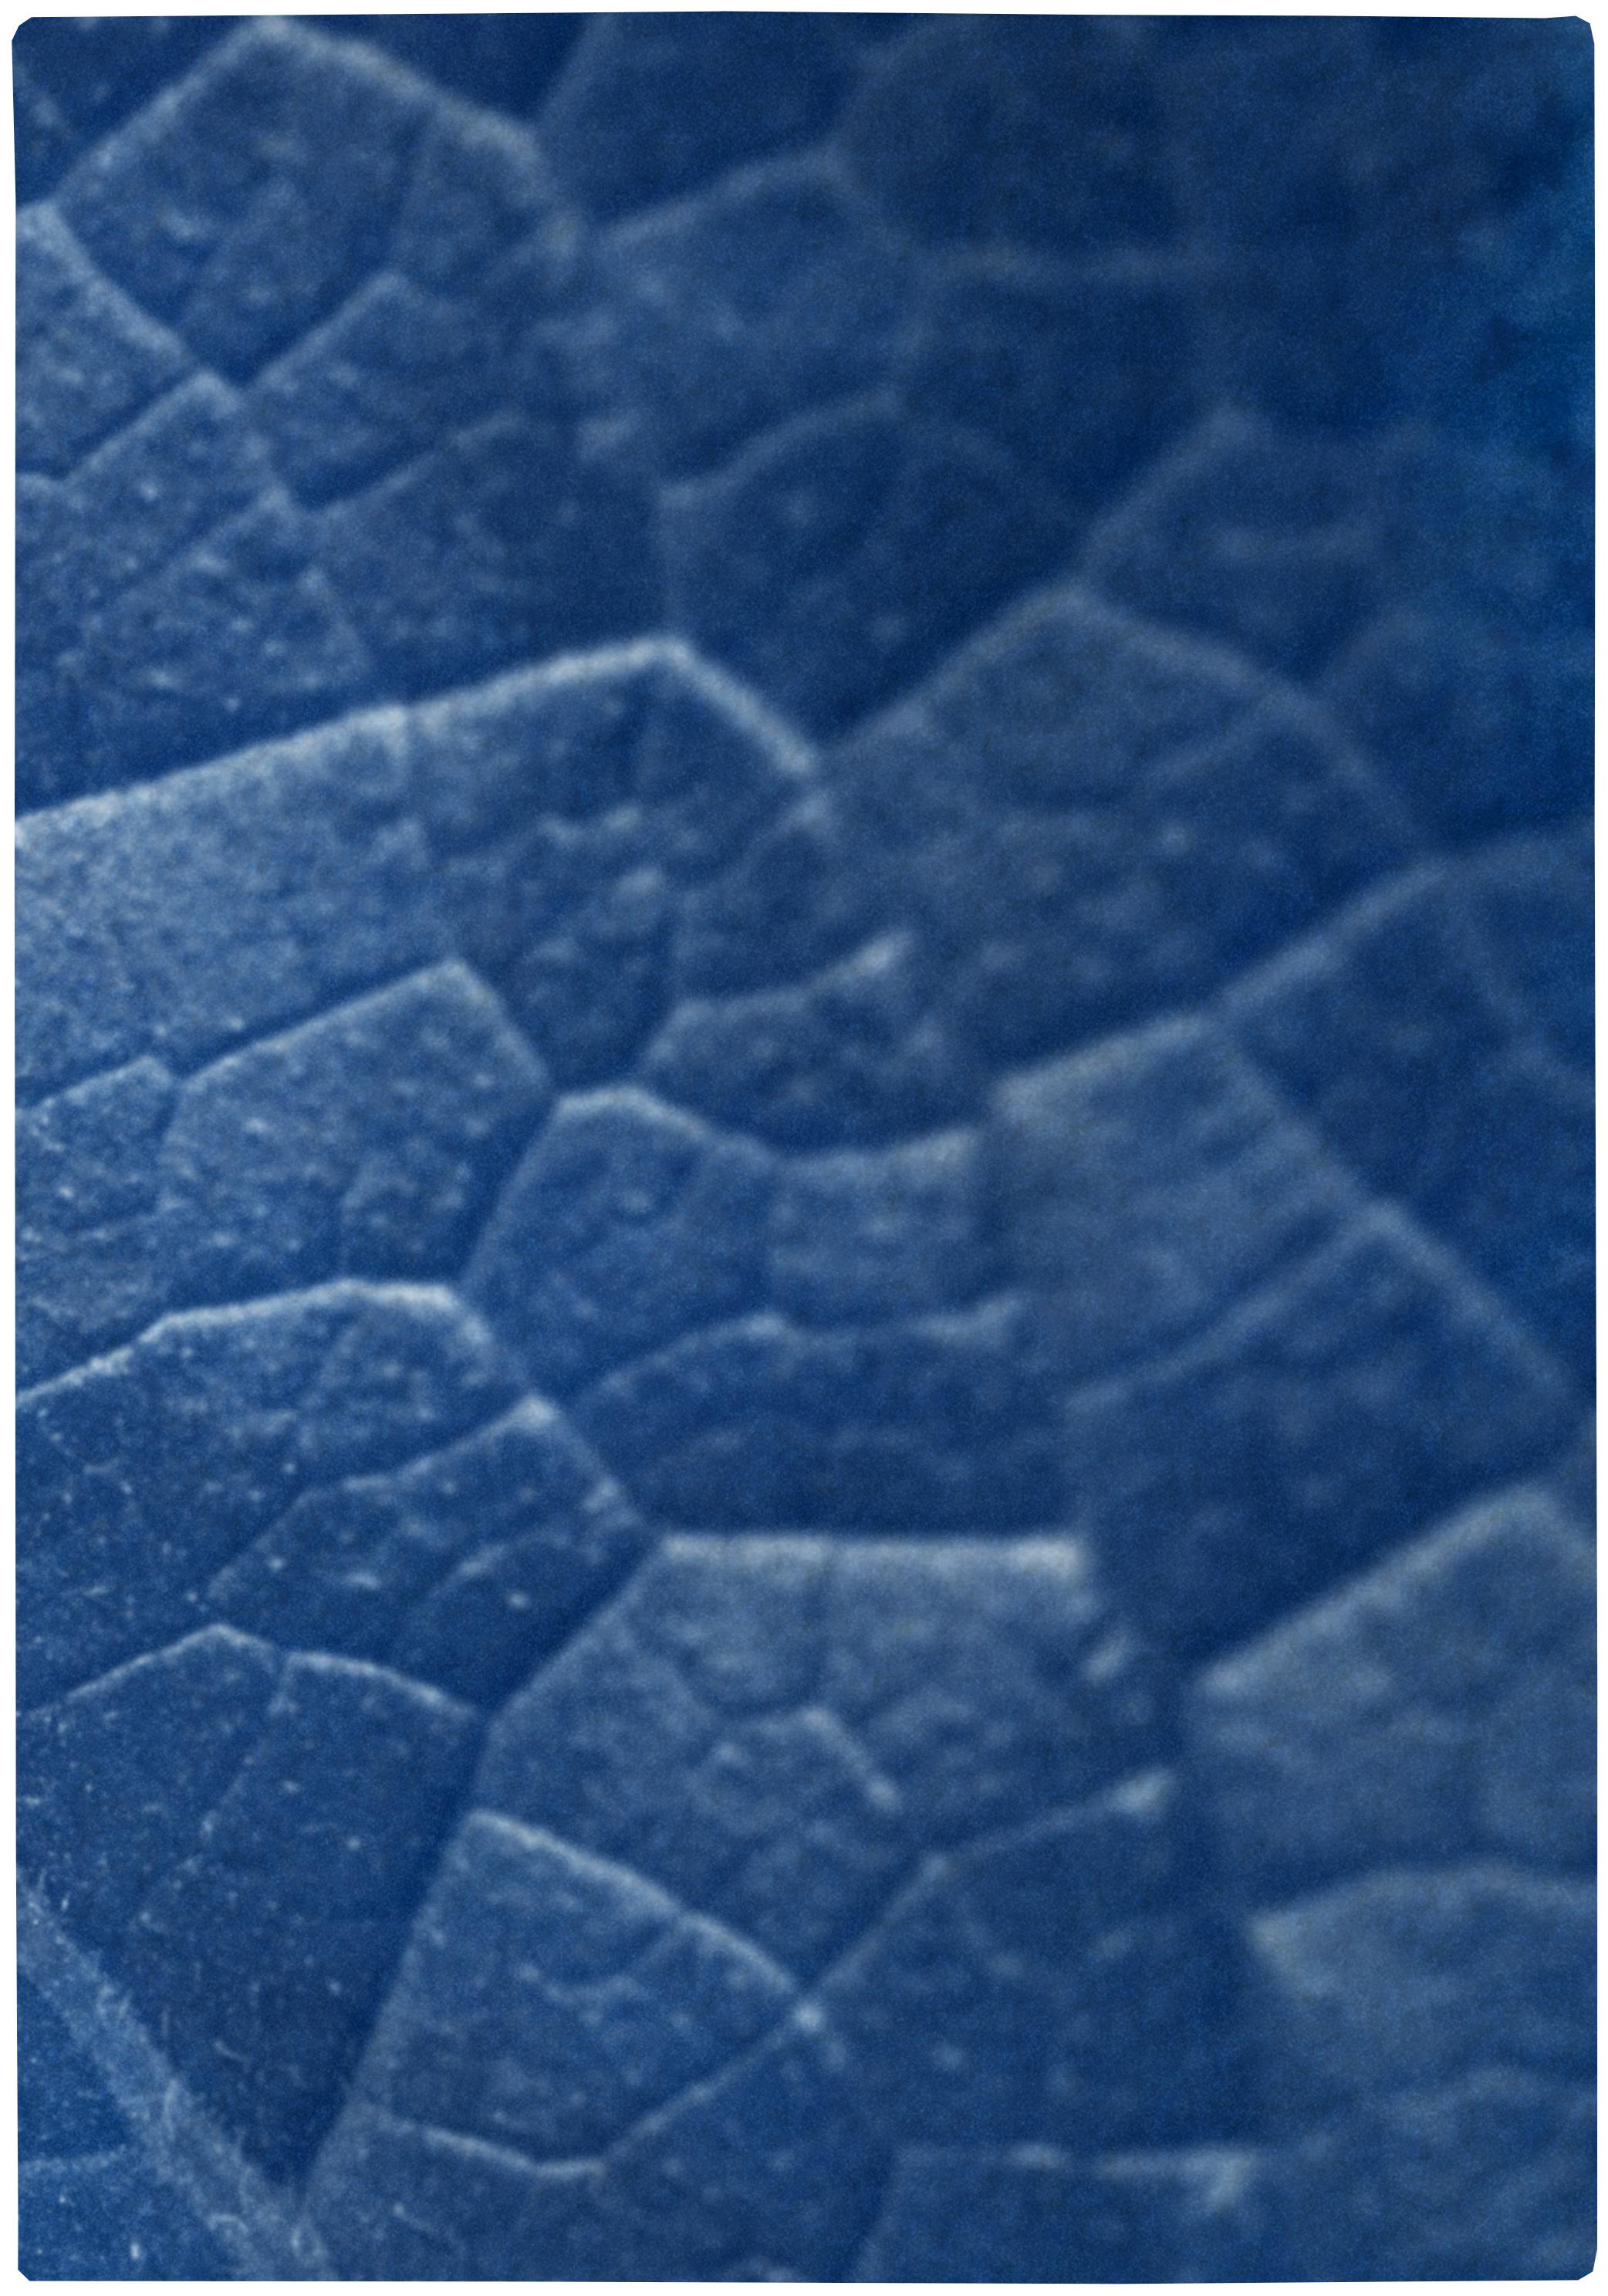 This is an exclusive handprinted limited edition cyanotype of a detailed macro leaf triptych. 

Details:
+ Title: Macro Leaf
+ Year: 2021
+ Edition Size: 100
+ Stamped and Certificate of Authenticity provided
+ Measurements : 100x210 cm (40 x 84